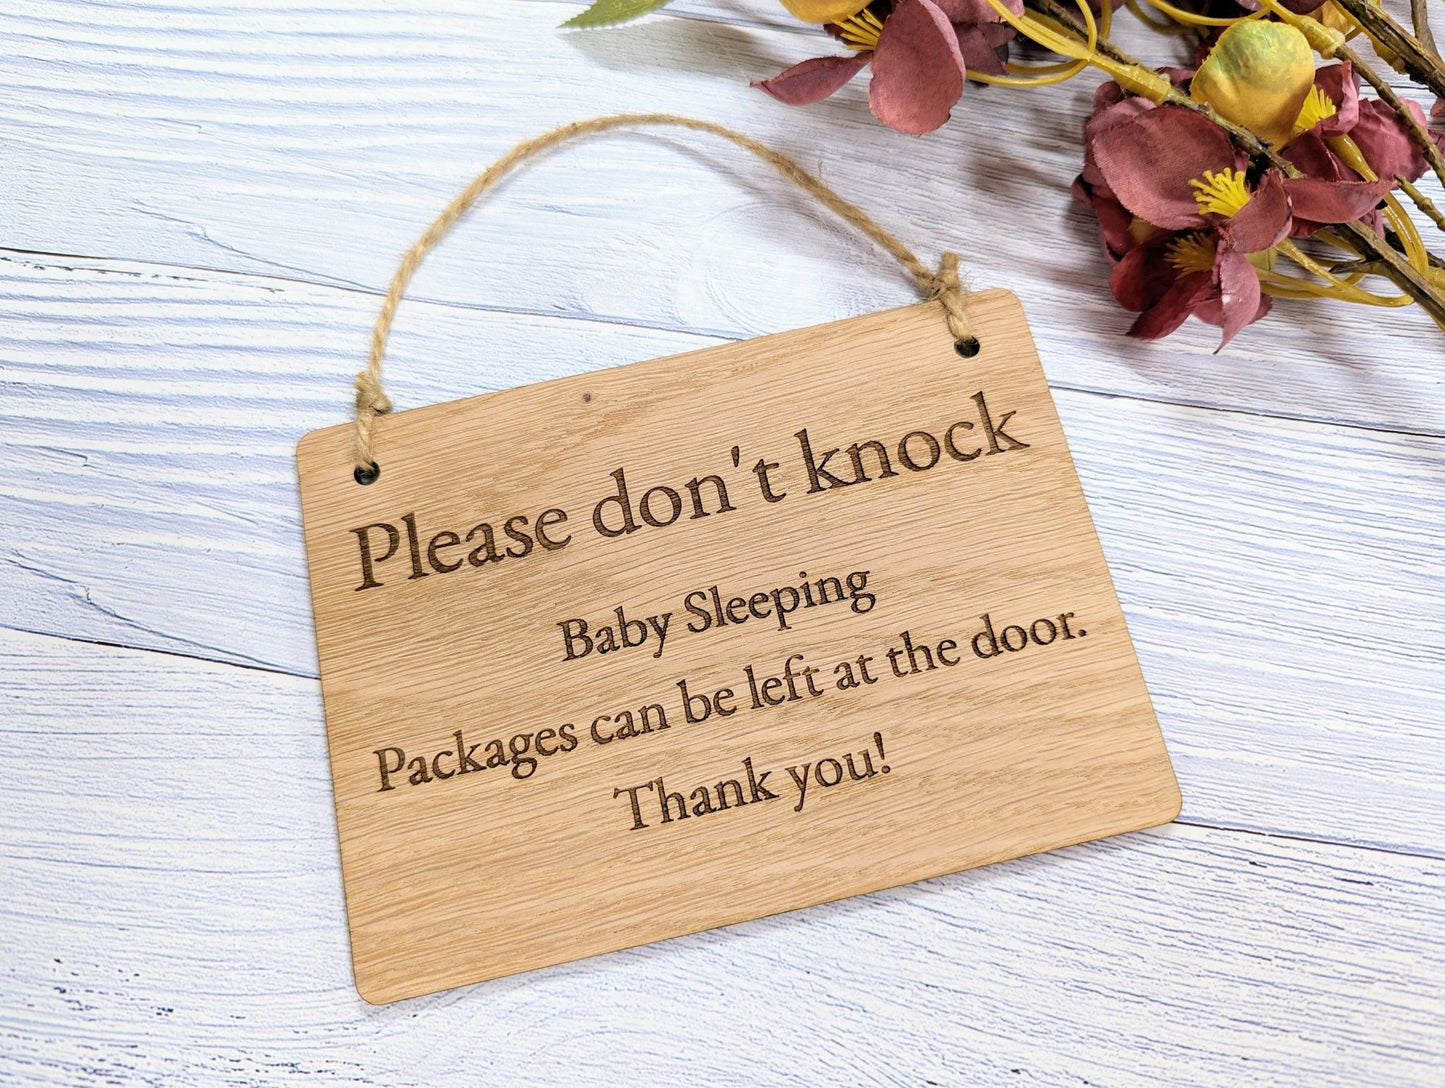 Please Don't Knock, Baby Sleeping" Wooden Sign - Ideal for Homes with Newborns, Night Shift Workers - Oak Veneered MDF - Customisable Text - CherryGroveCraft